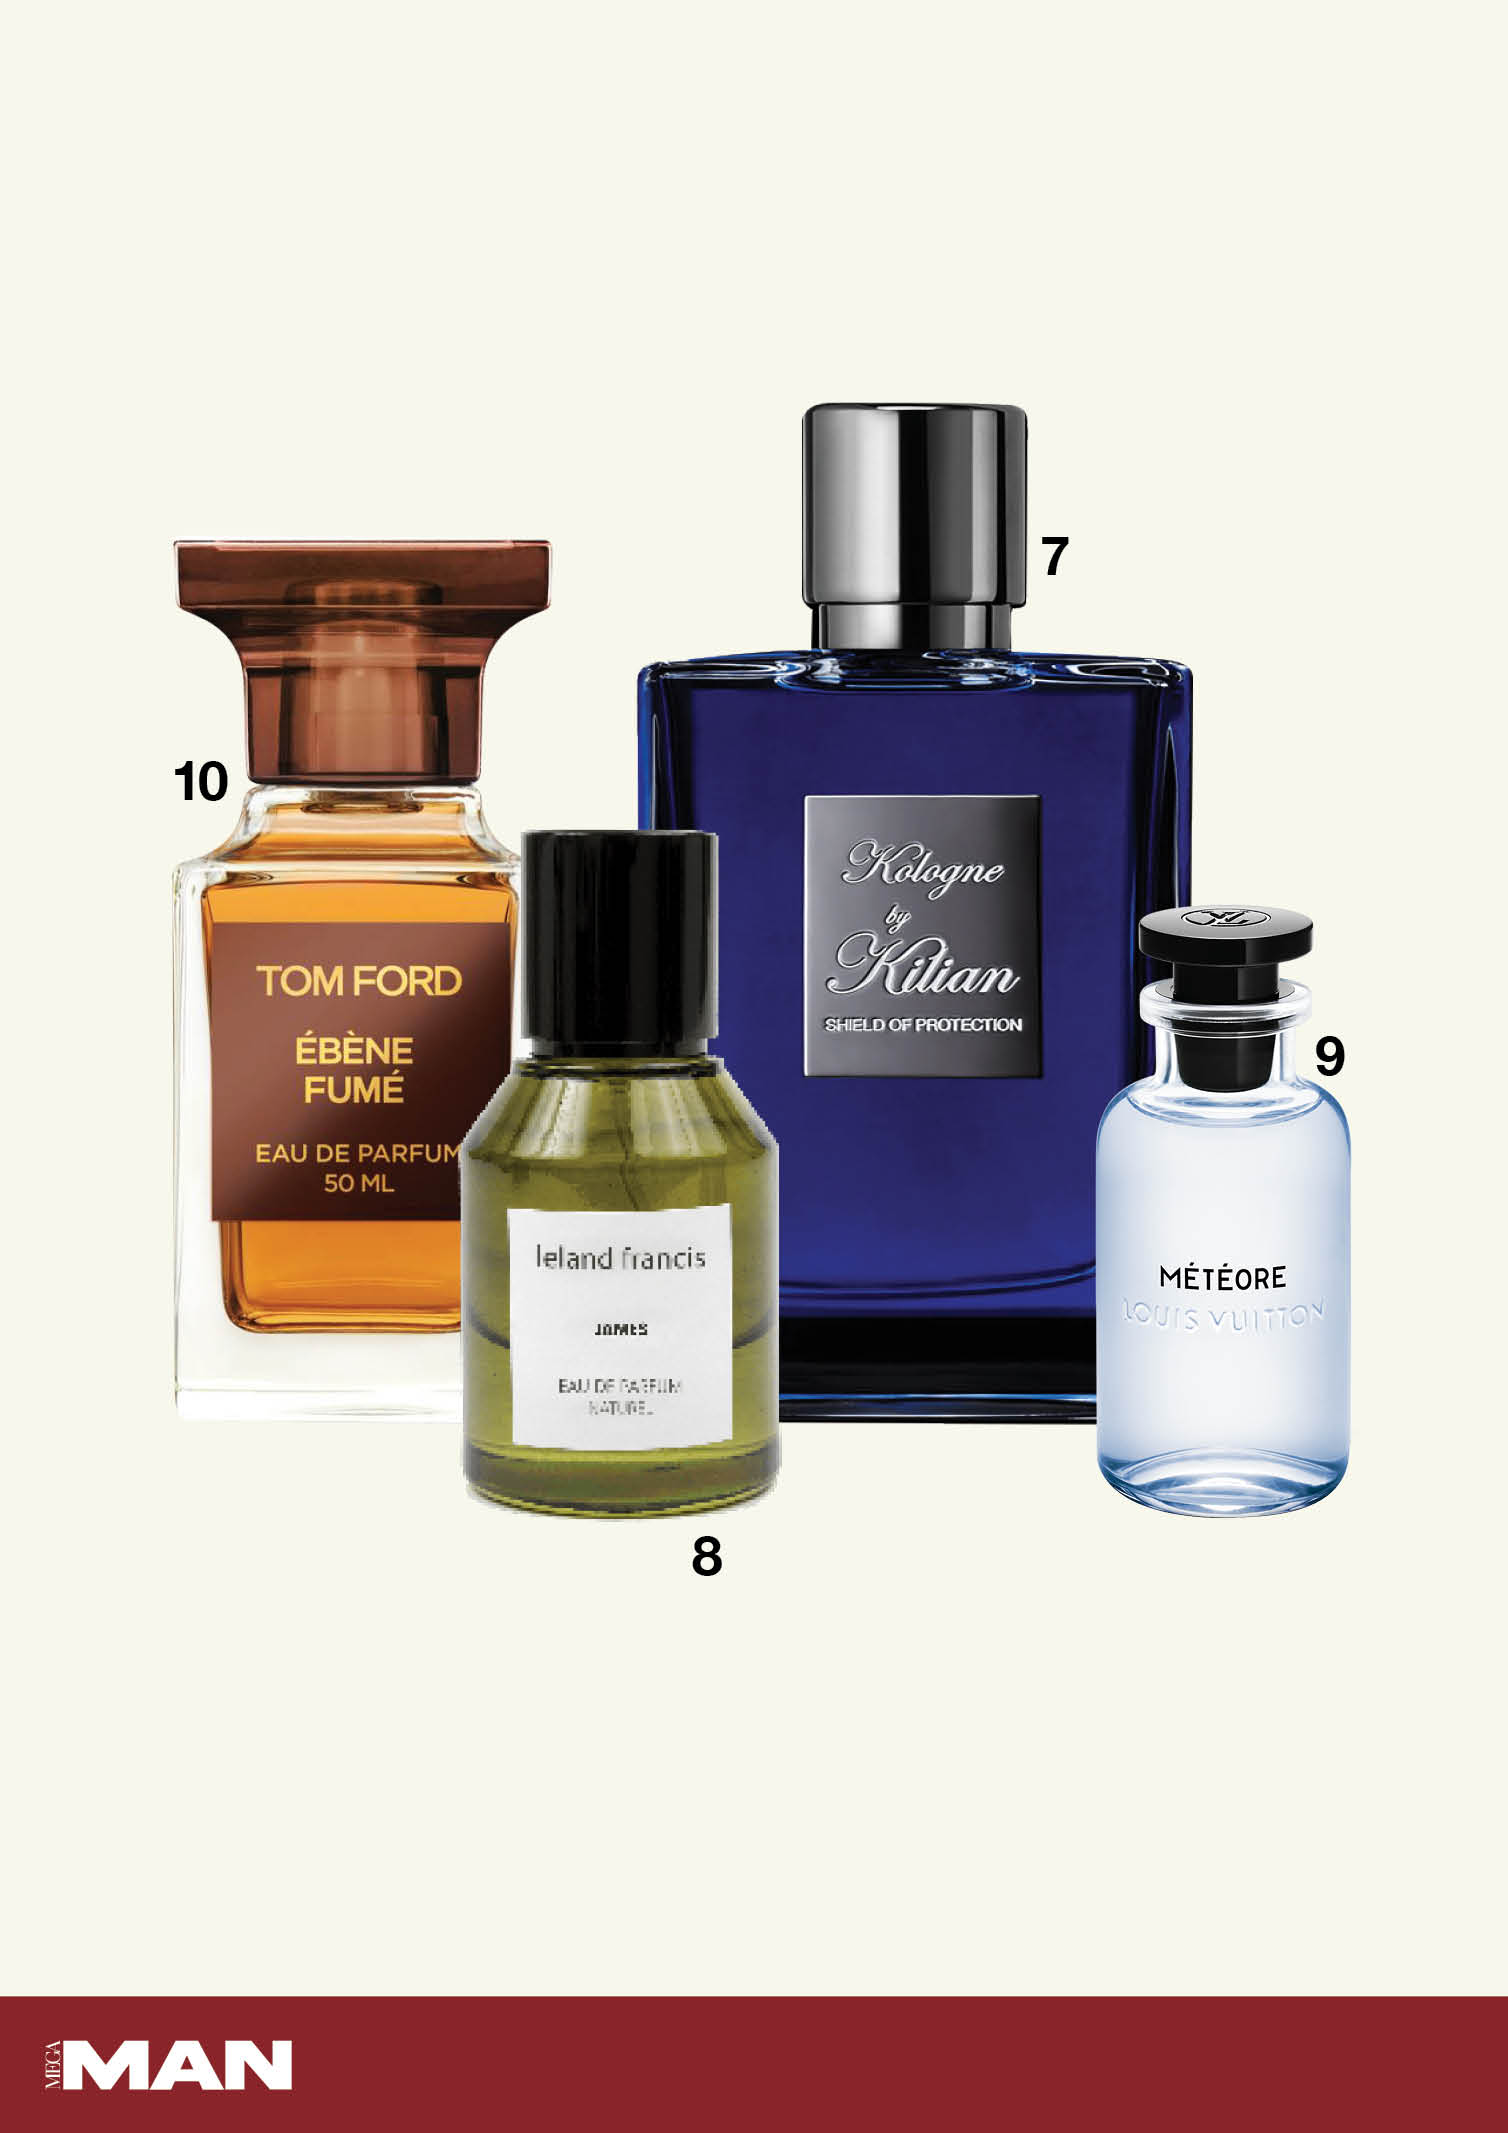 Tom Ford Ebene Fume, James by Leland Francis, Kologne by Kilian Shield of Protection and Meteore by Louis Vuitton fragrances 